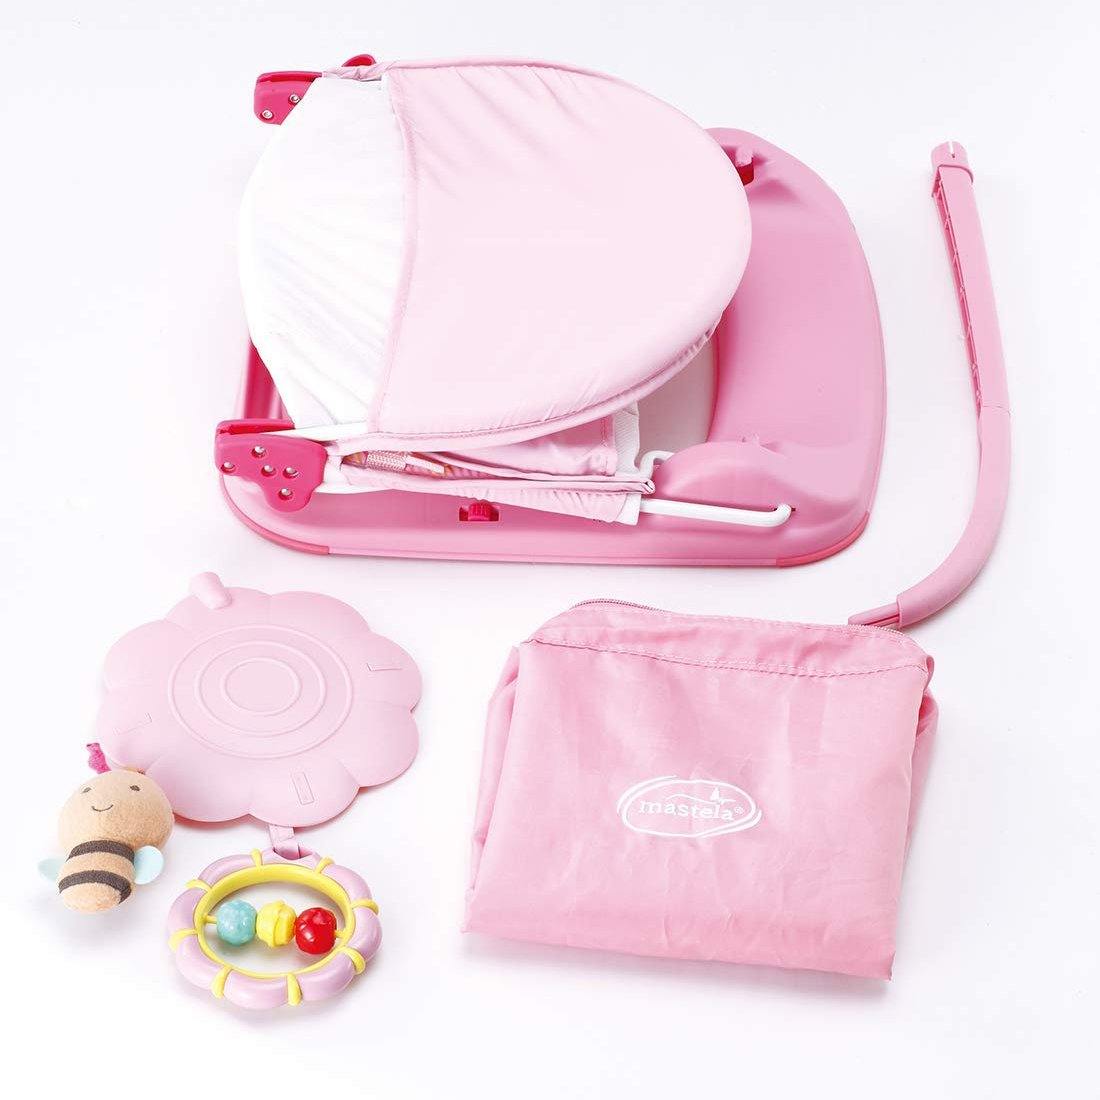 Masteal Baby Foldup Infant Seat- Pink - Little Angel Baby Store